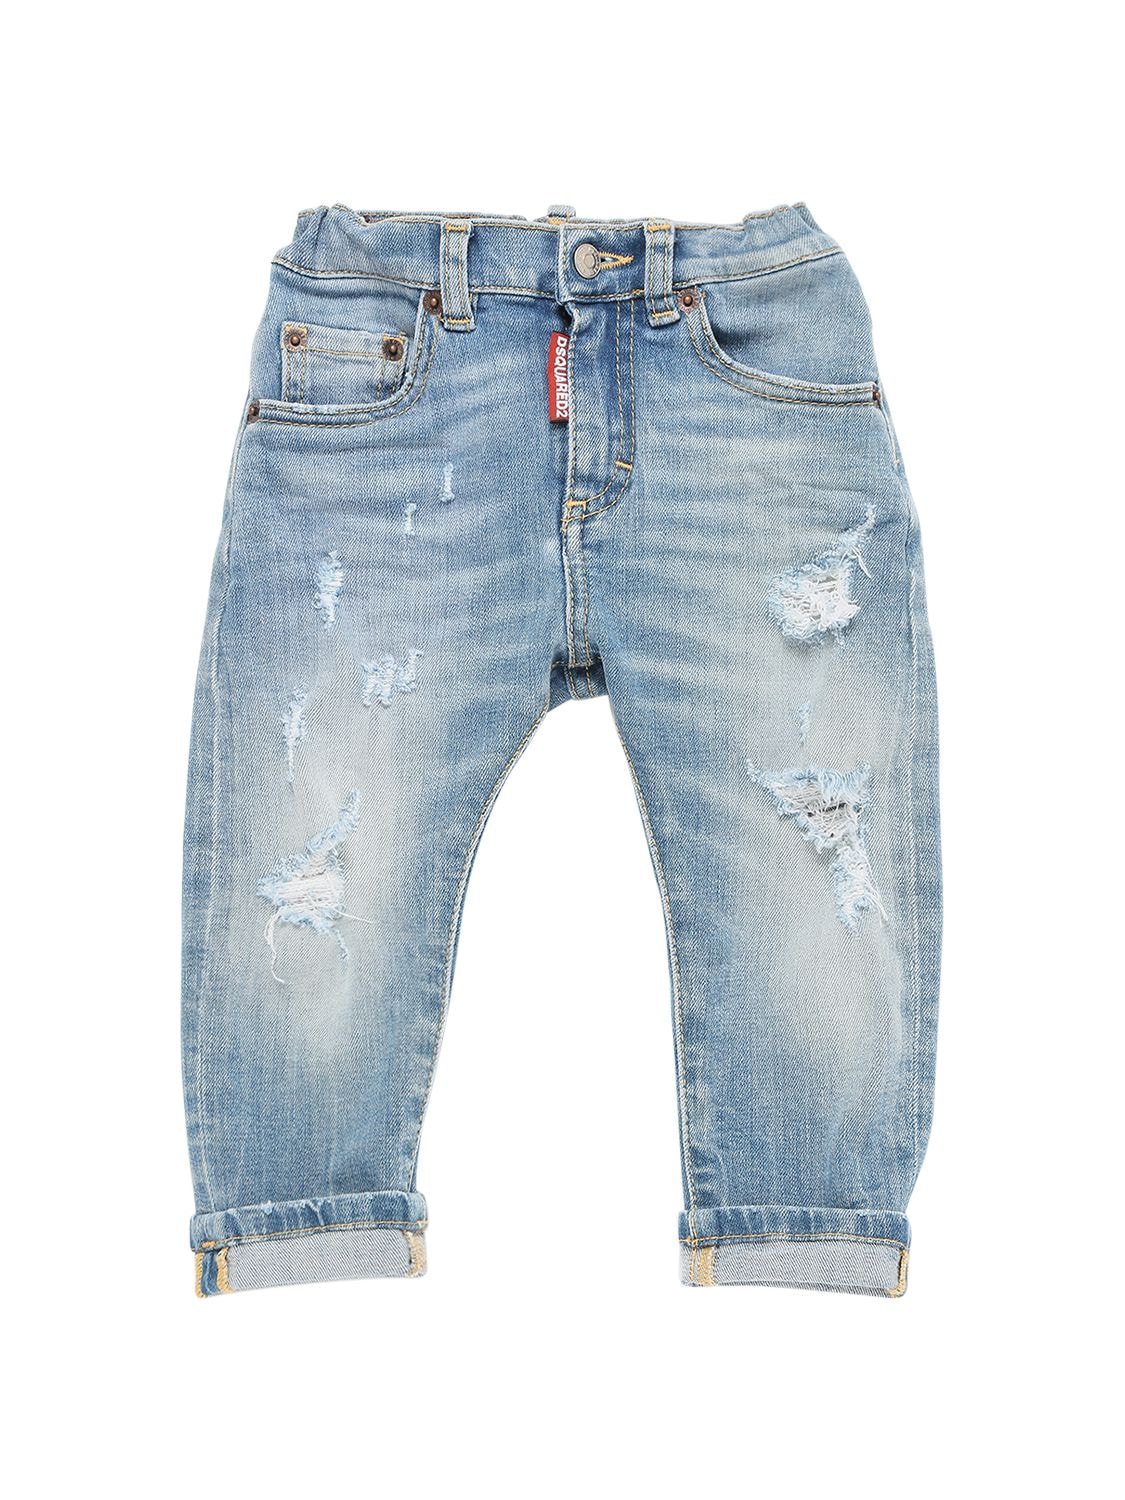 Distressed & Washed Cotton Denim Jeans